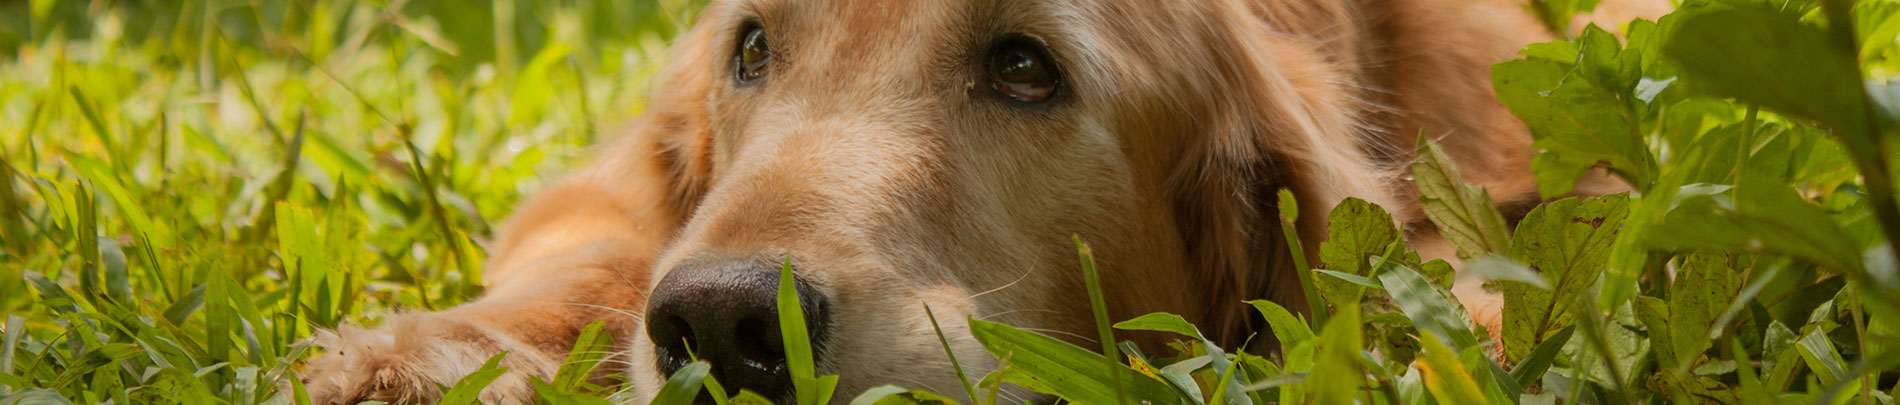 A close up of a dog lying down in the grass.